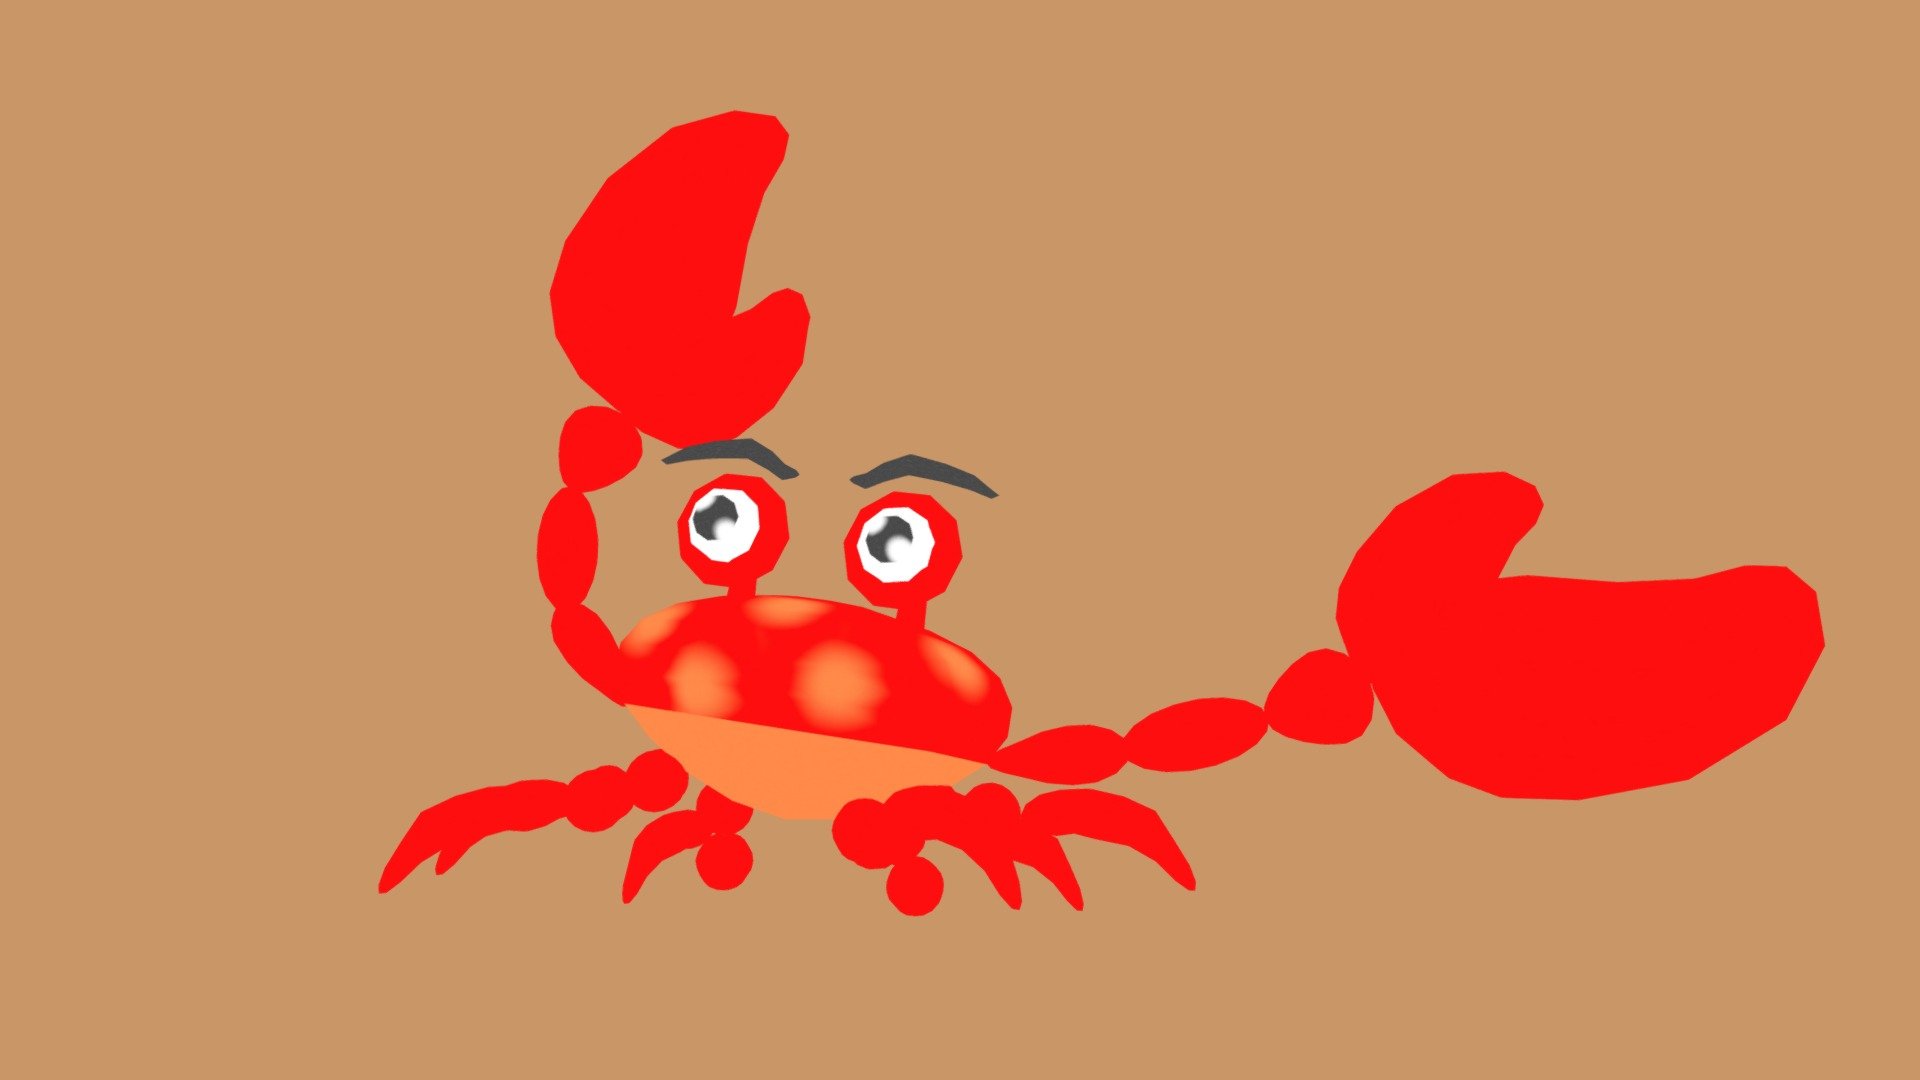 Global Game Jam 2019, Team Crab Cups mascot, KEVIN, in his newly evolved form for 2019, hidden in the game Inebriation Station
Free download for both the game and Kevin 2019 here
Kevin - https://toddcarr3.wixsite.com/berrysspray/character
Inebriation Station - https://toddcarr3.wixsite.com/berrysspray/games - Kevin 2019 - Download Free 3D model by Todd Carr (@todd.3) 3d model